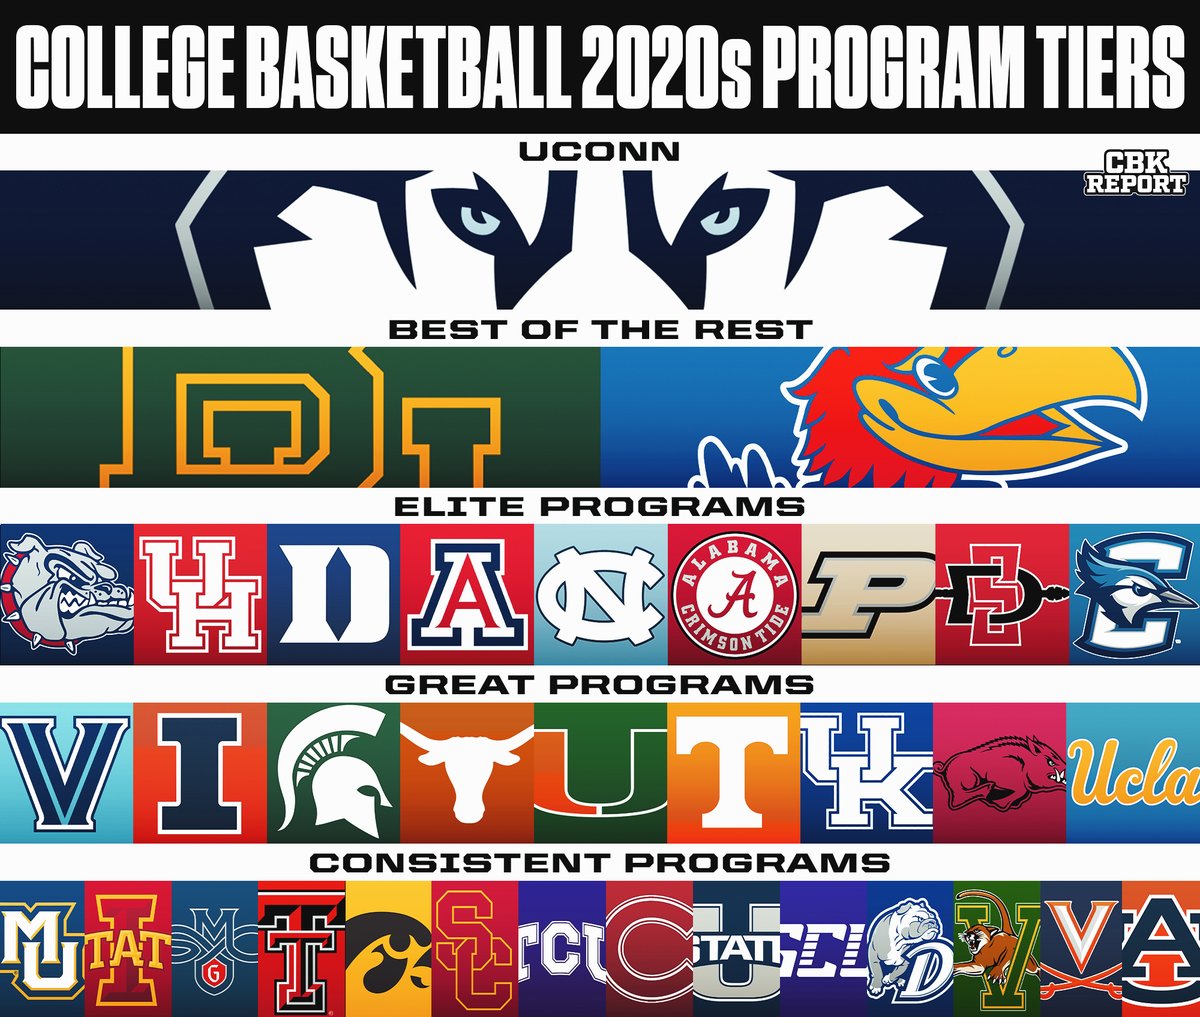 College Basketball program tiers in the 2020s